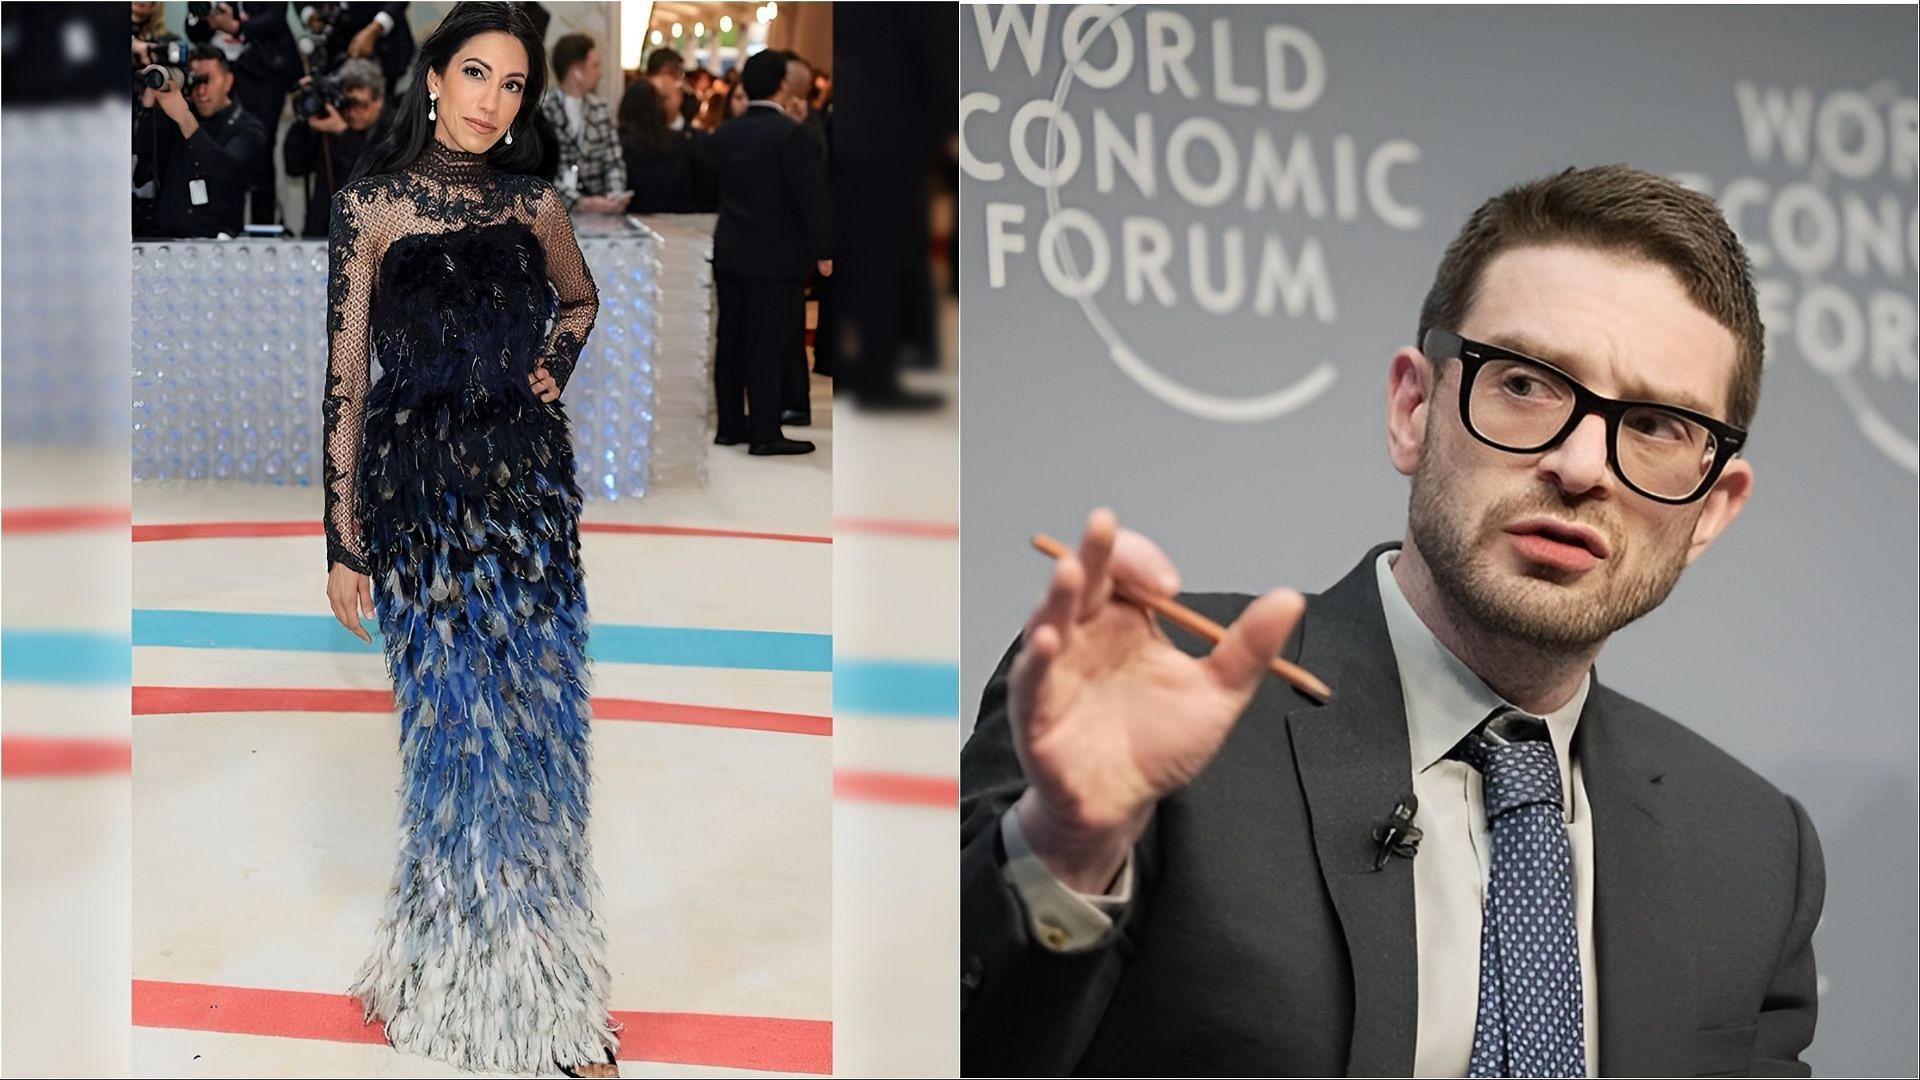 Huma Abedin and Alex Soros are reportedly dating each other (Images via humaabedin and alexsoros/Instagram)